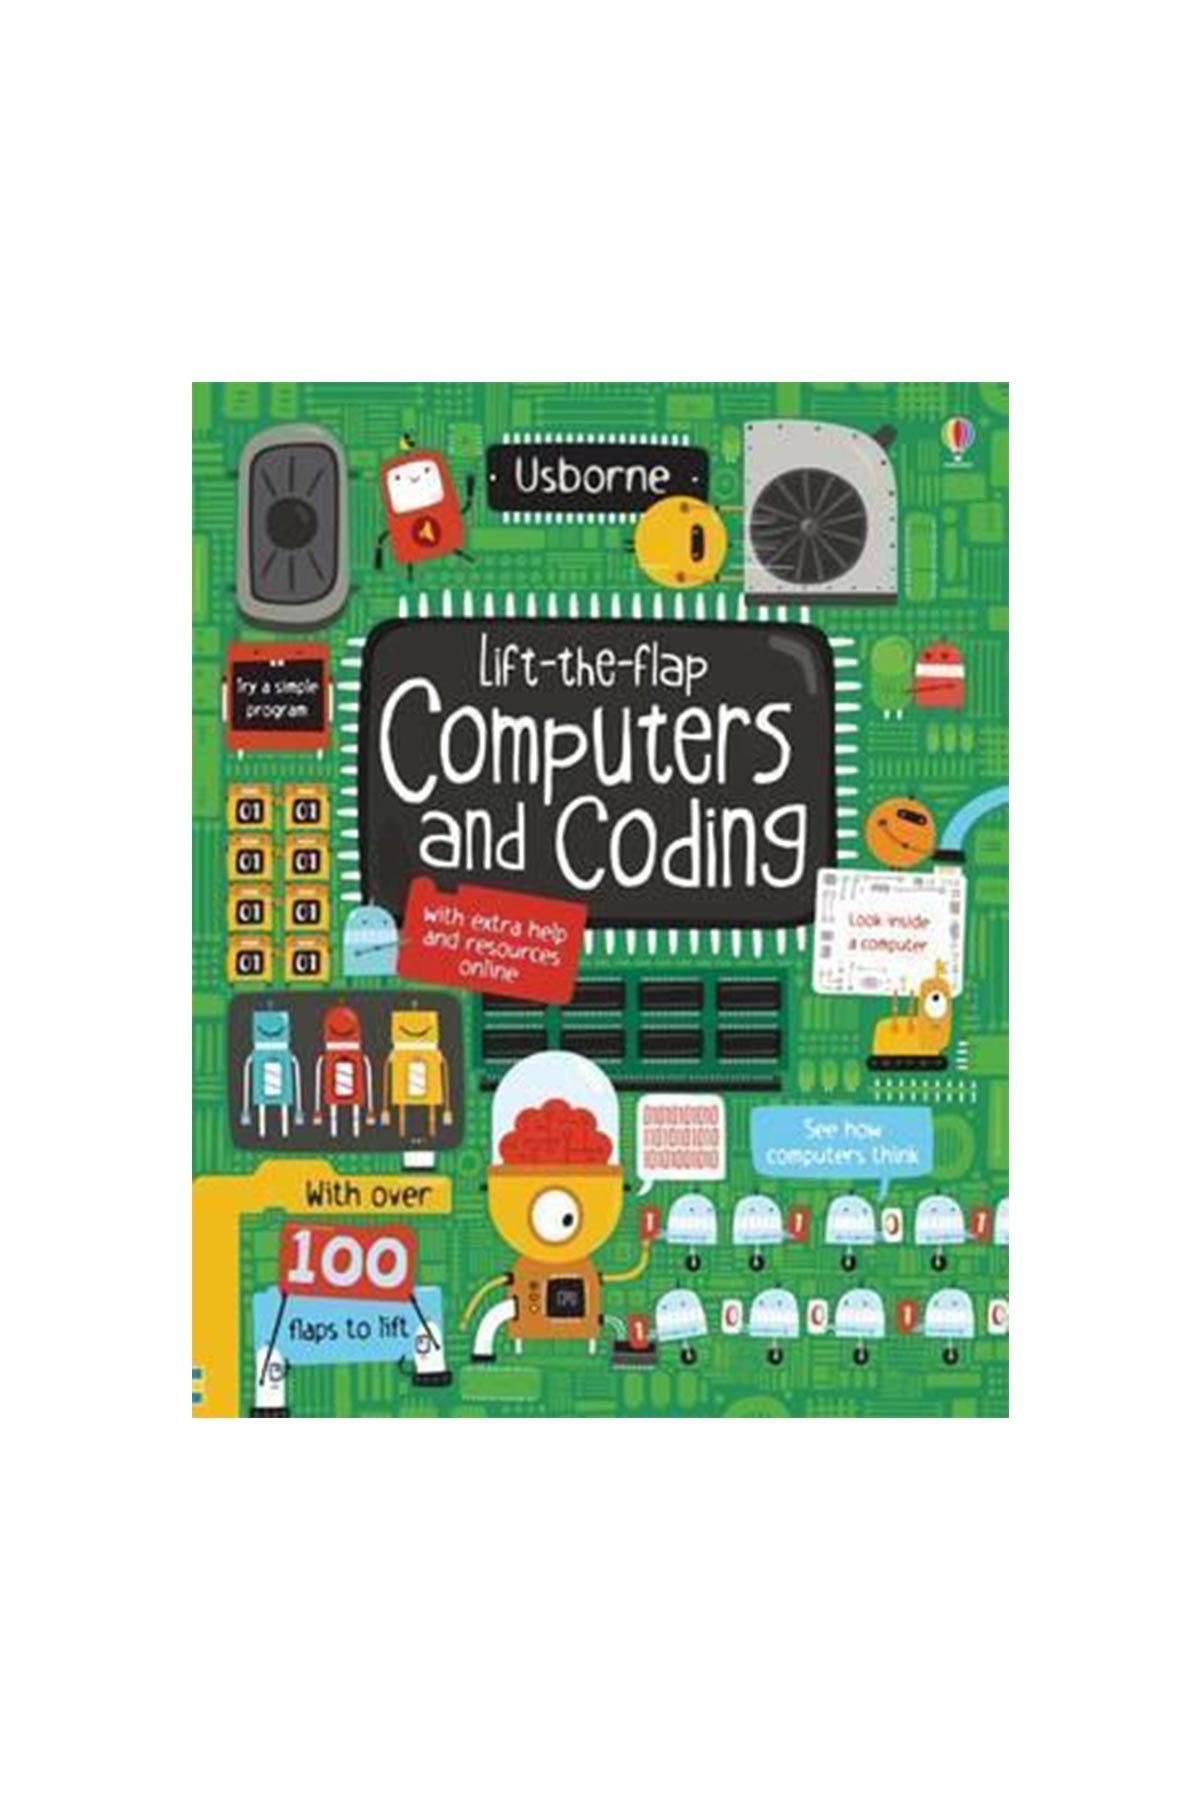 The Usborne LTF Computers and Coding